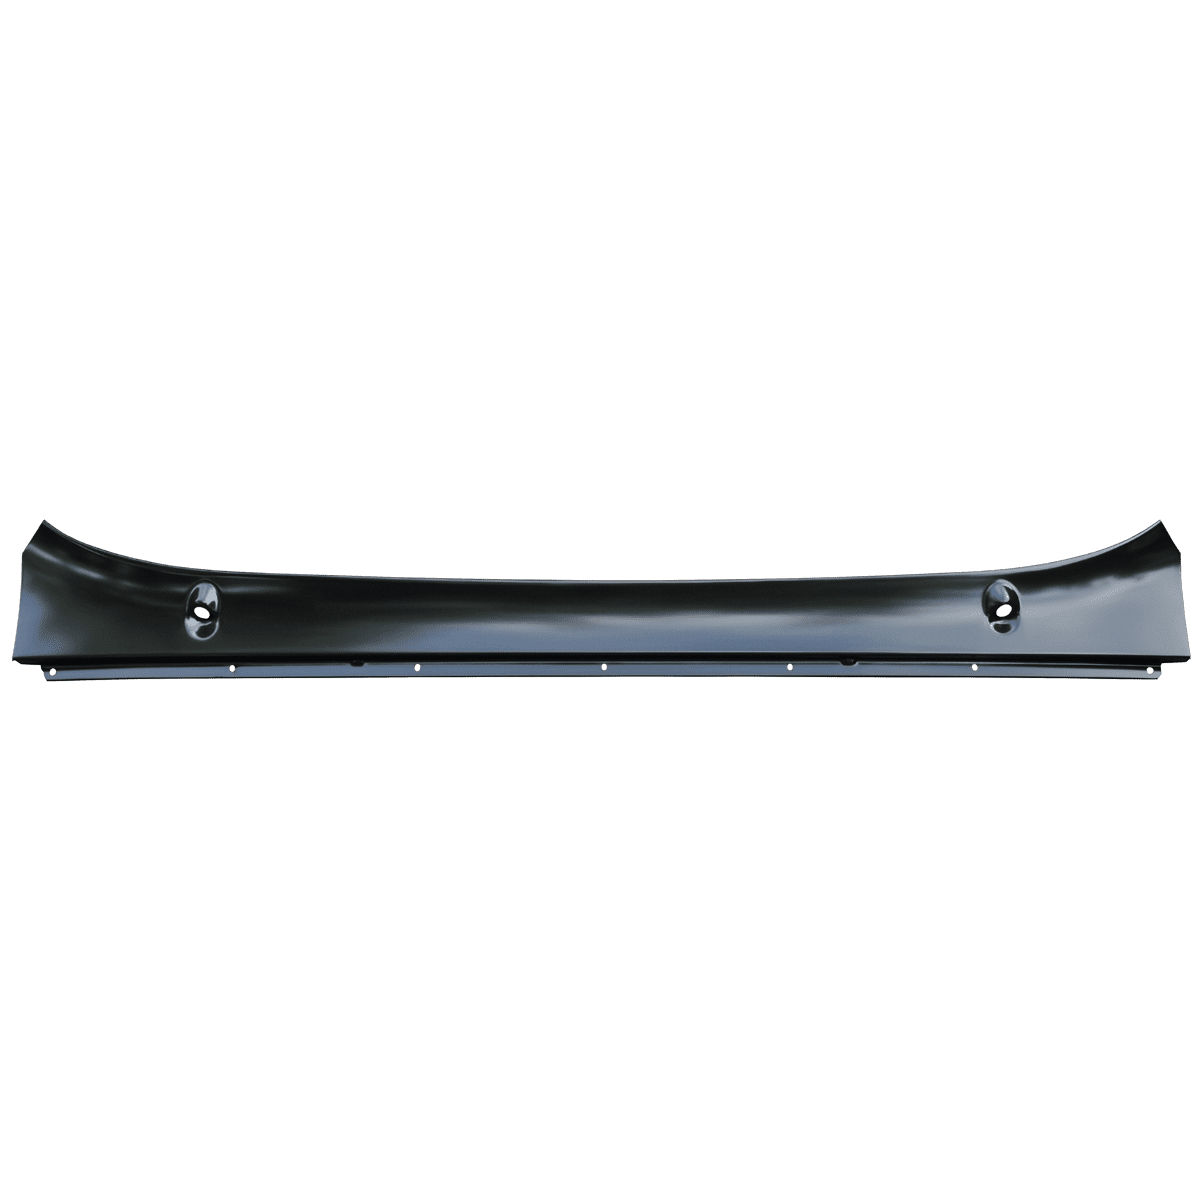 Front Fender Lower Rear Section fits 60-66 Chevy & GMC Pickup-PAIR